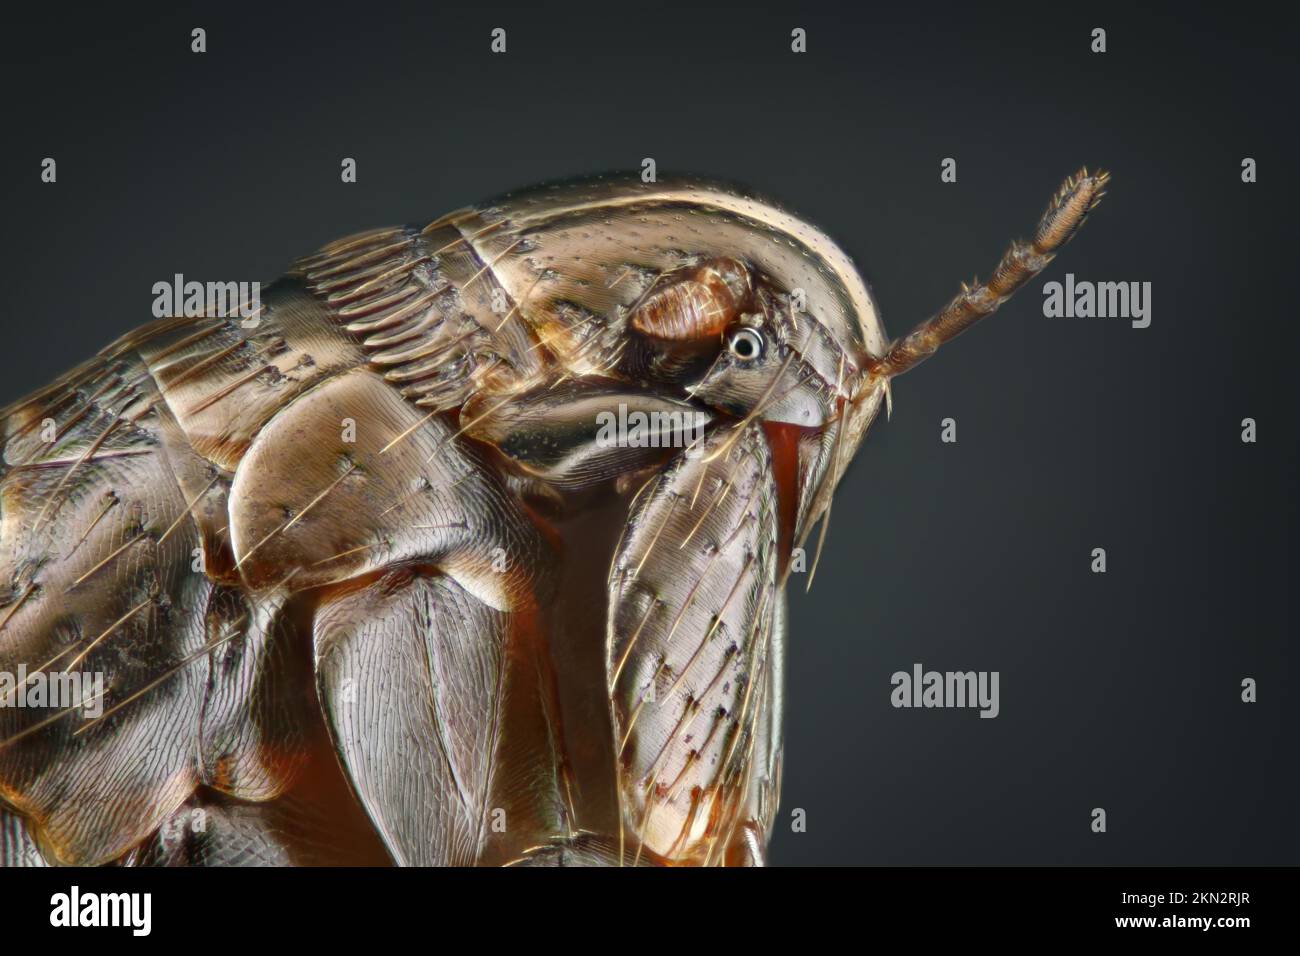 Head and front part of a flea (Siphonaptera) against a black background Stock Photo